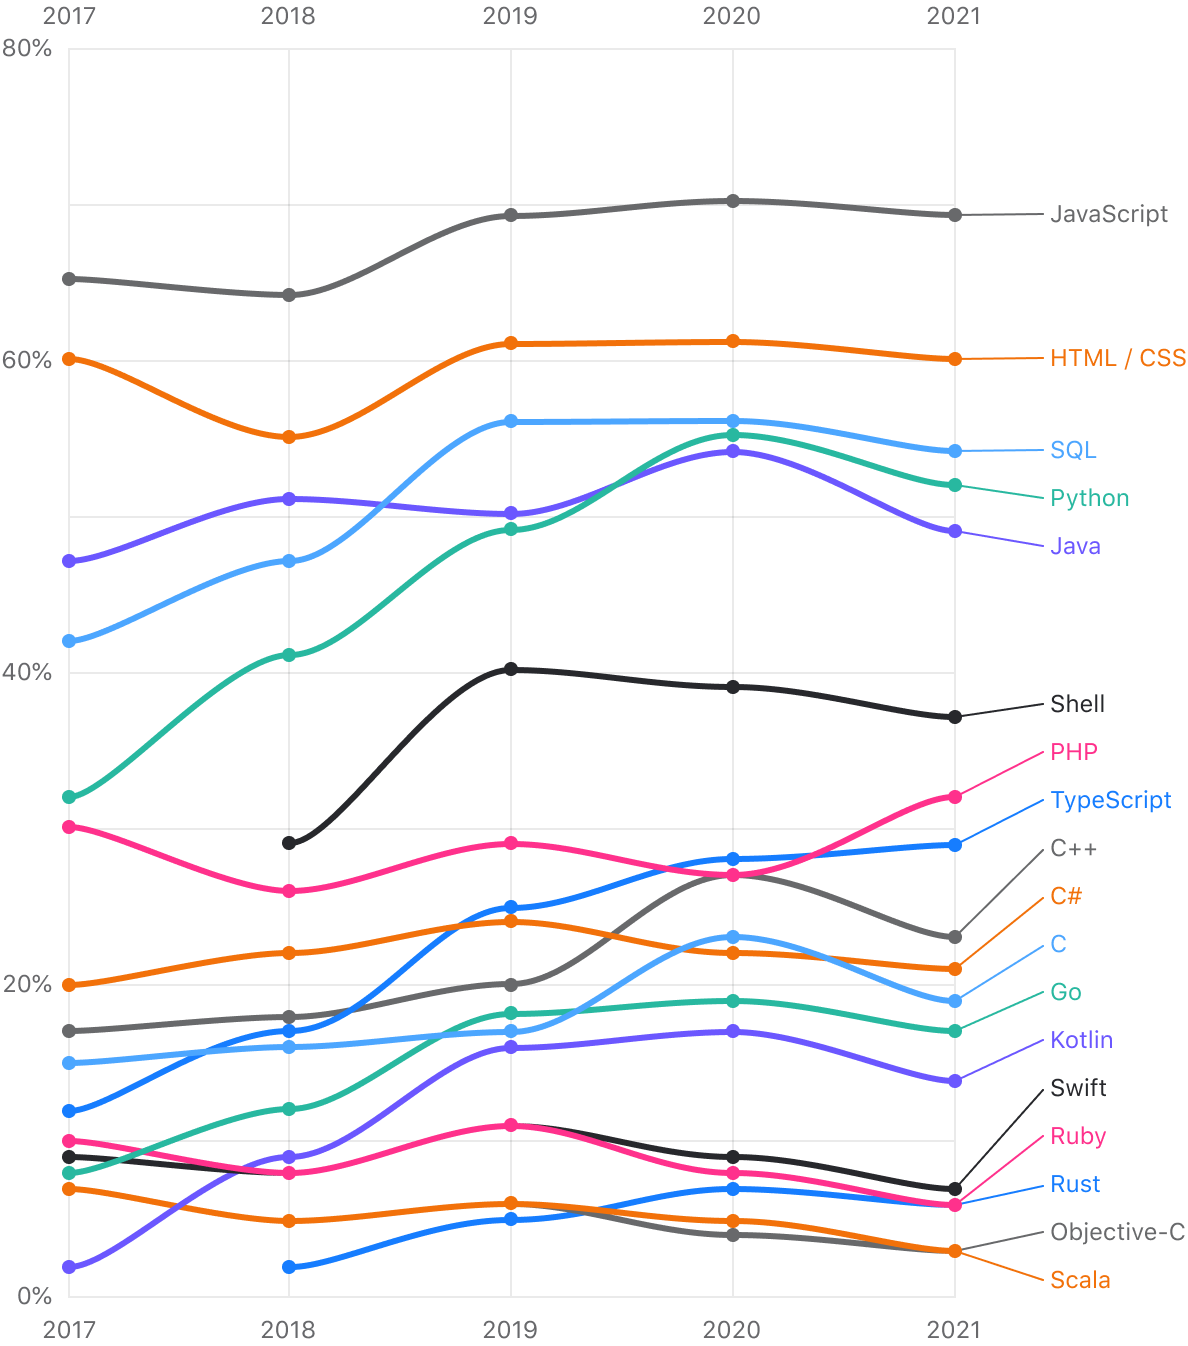 Line chart: Popularity of programming languages over the last 5 years